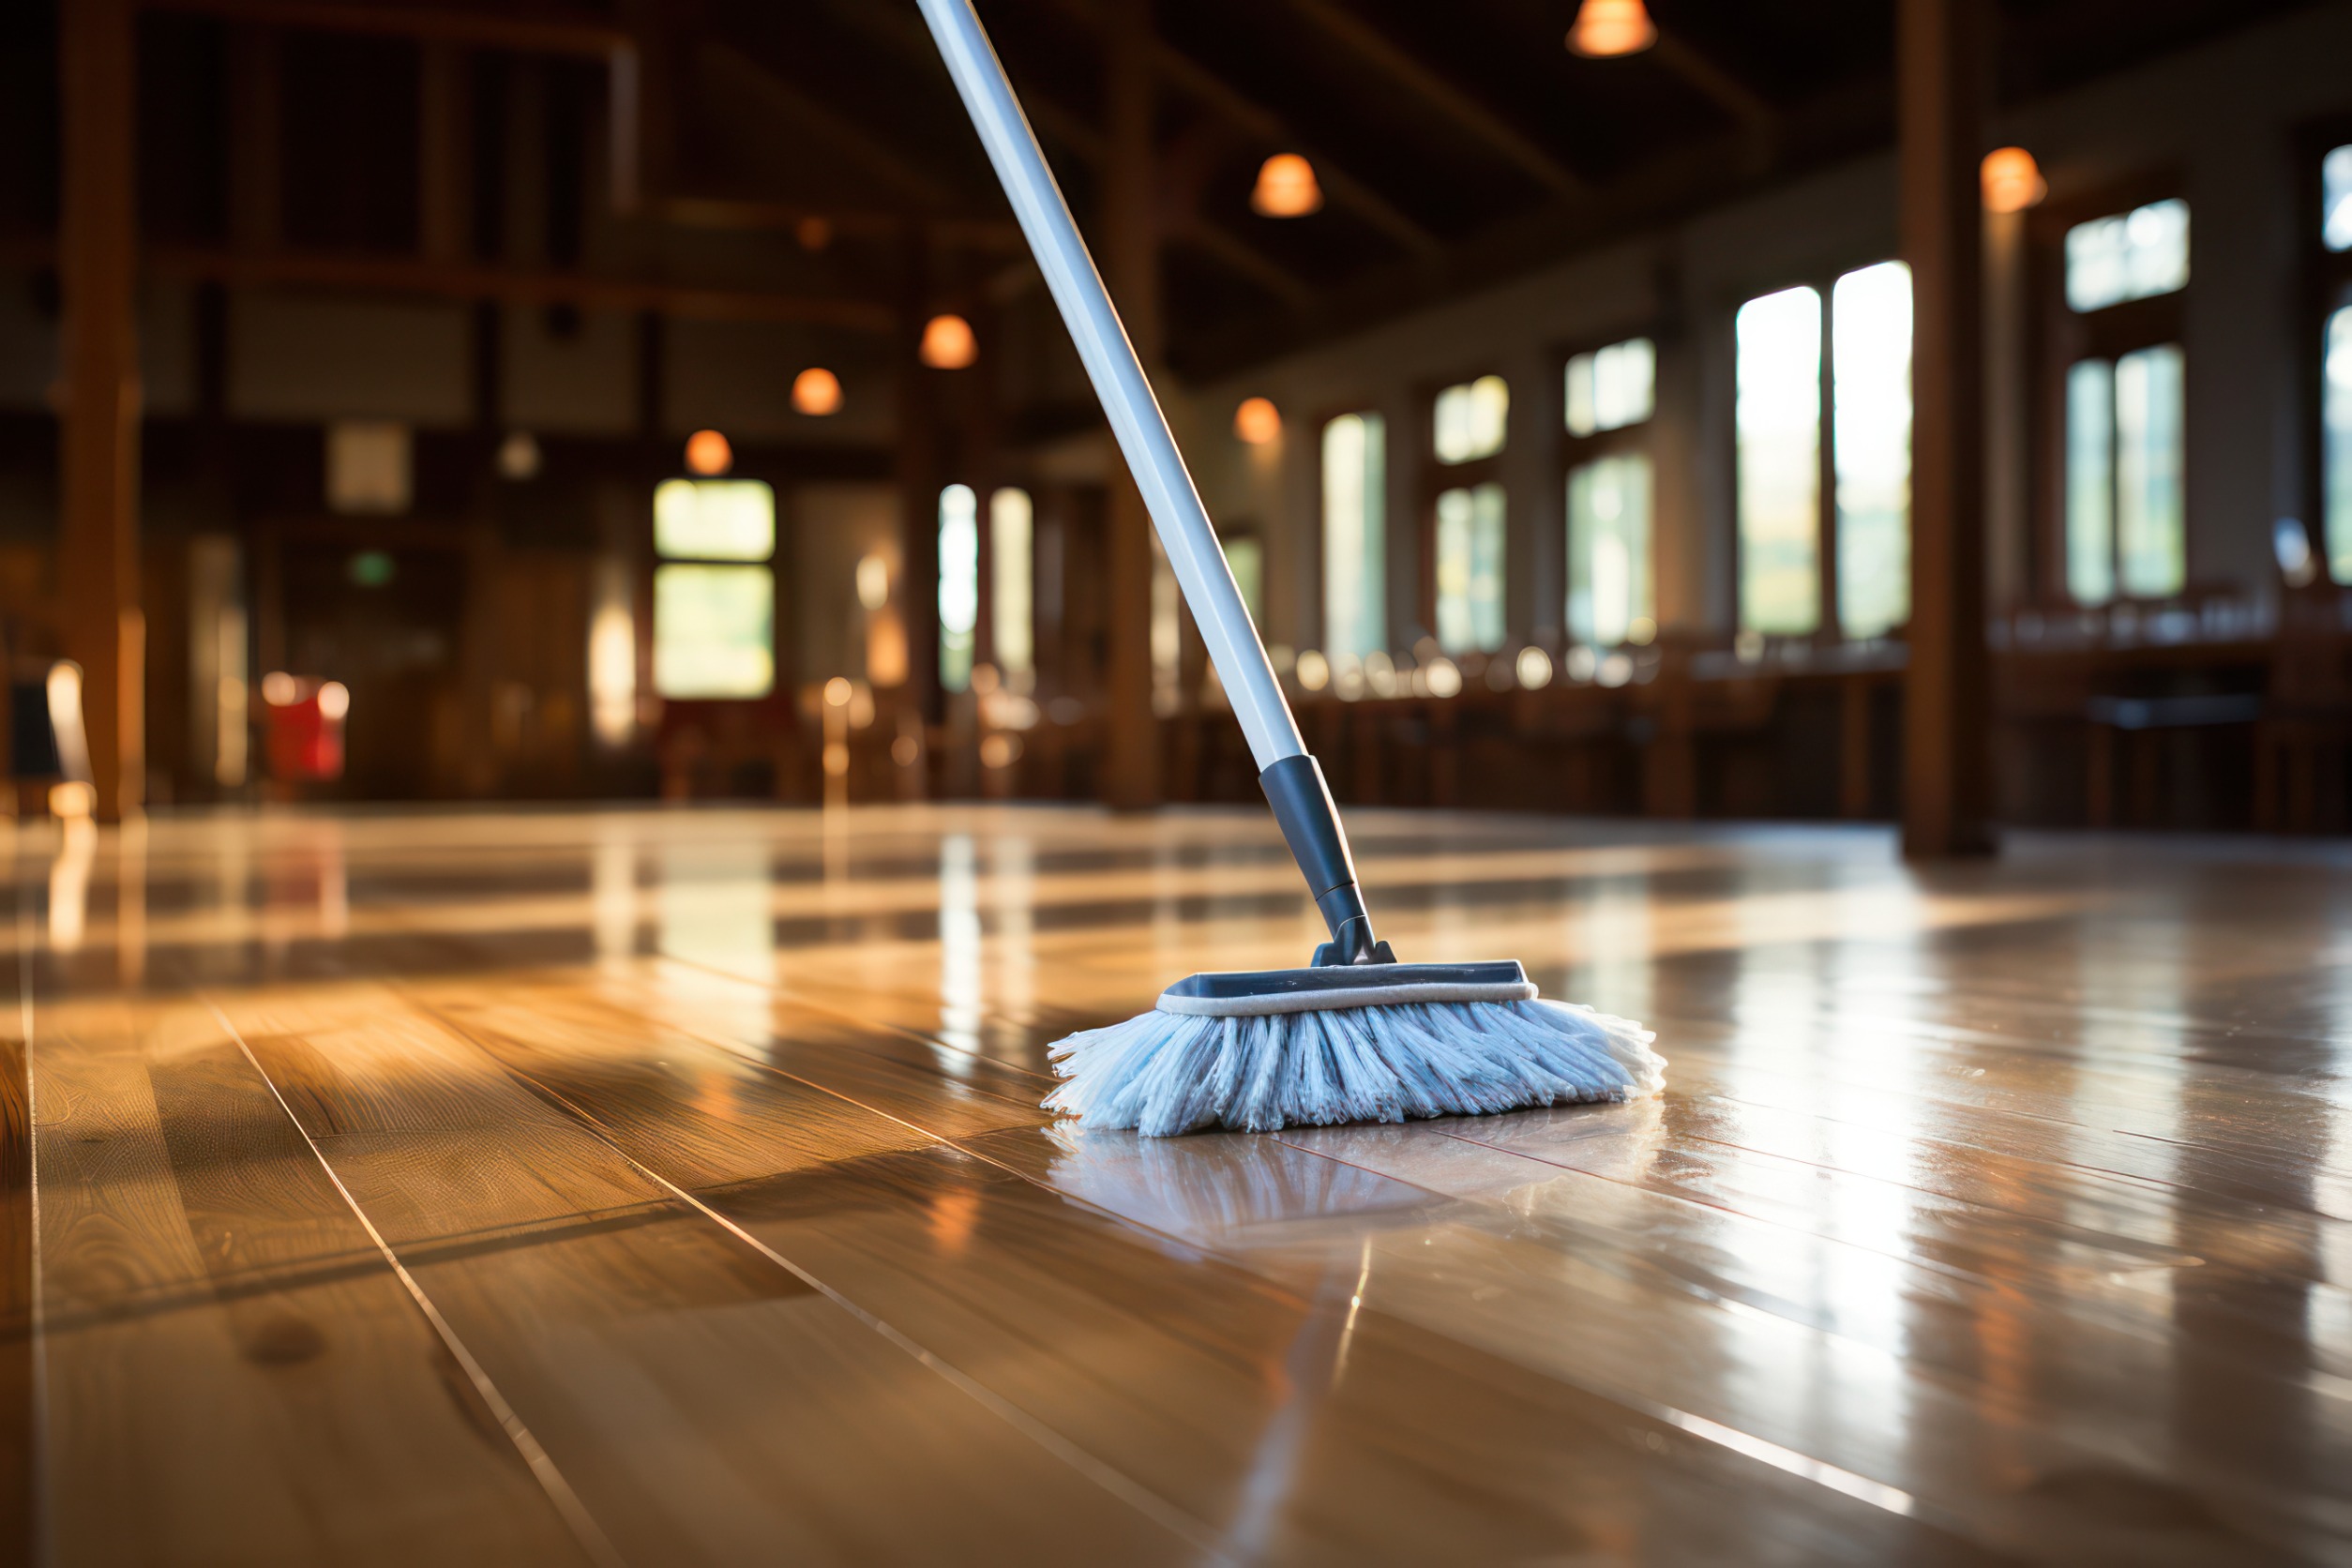 Cleaning and Well-being